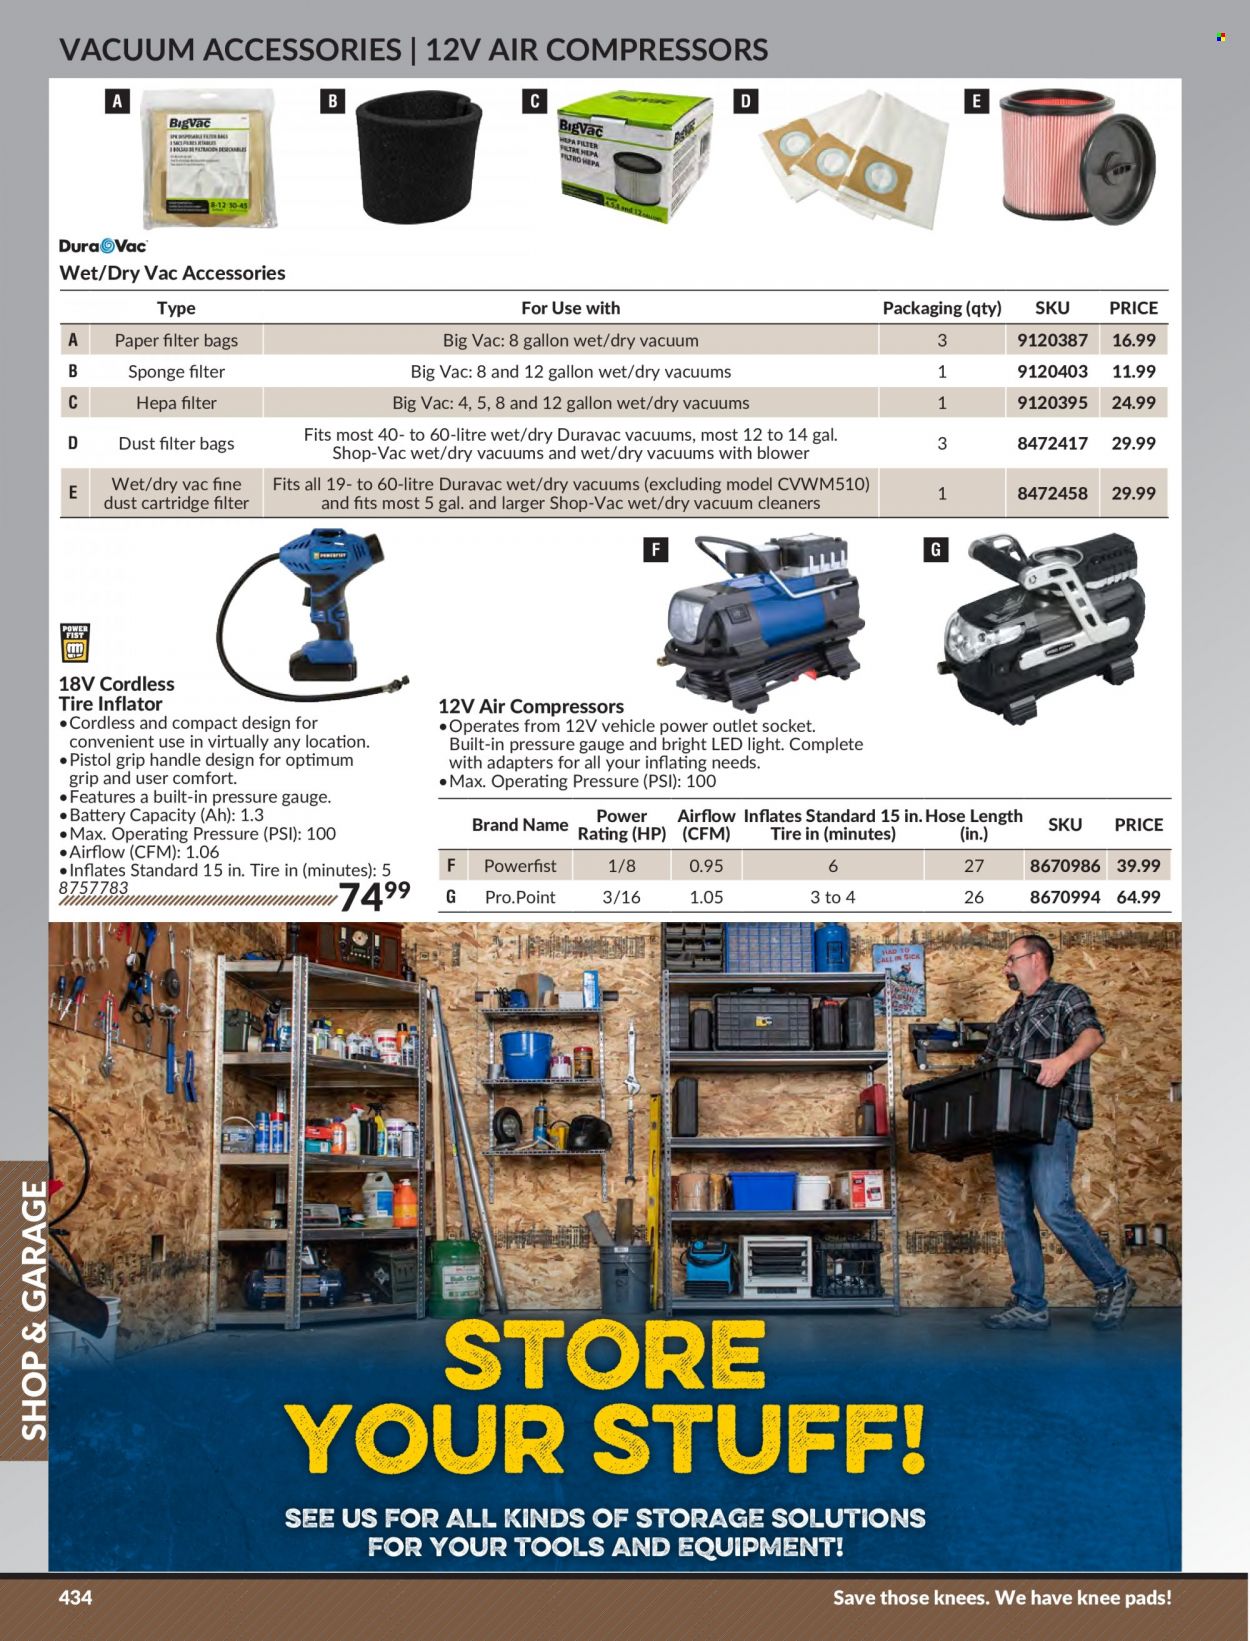 Princess Auto Flyer - Sales products - LED light, blower, air compressor, knee pads, vehicle, tire inflator, battery. Page 442.